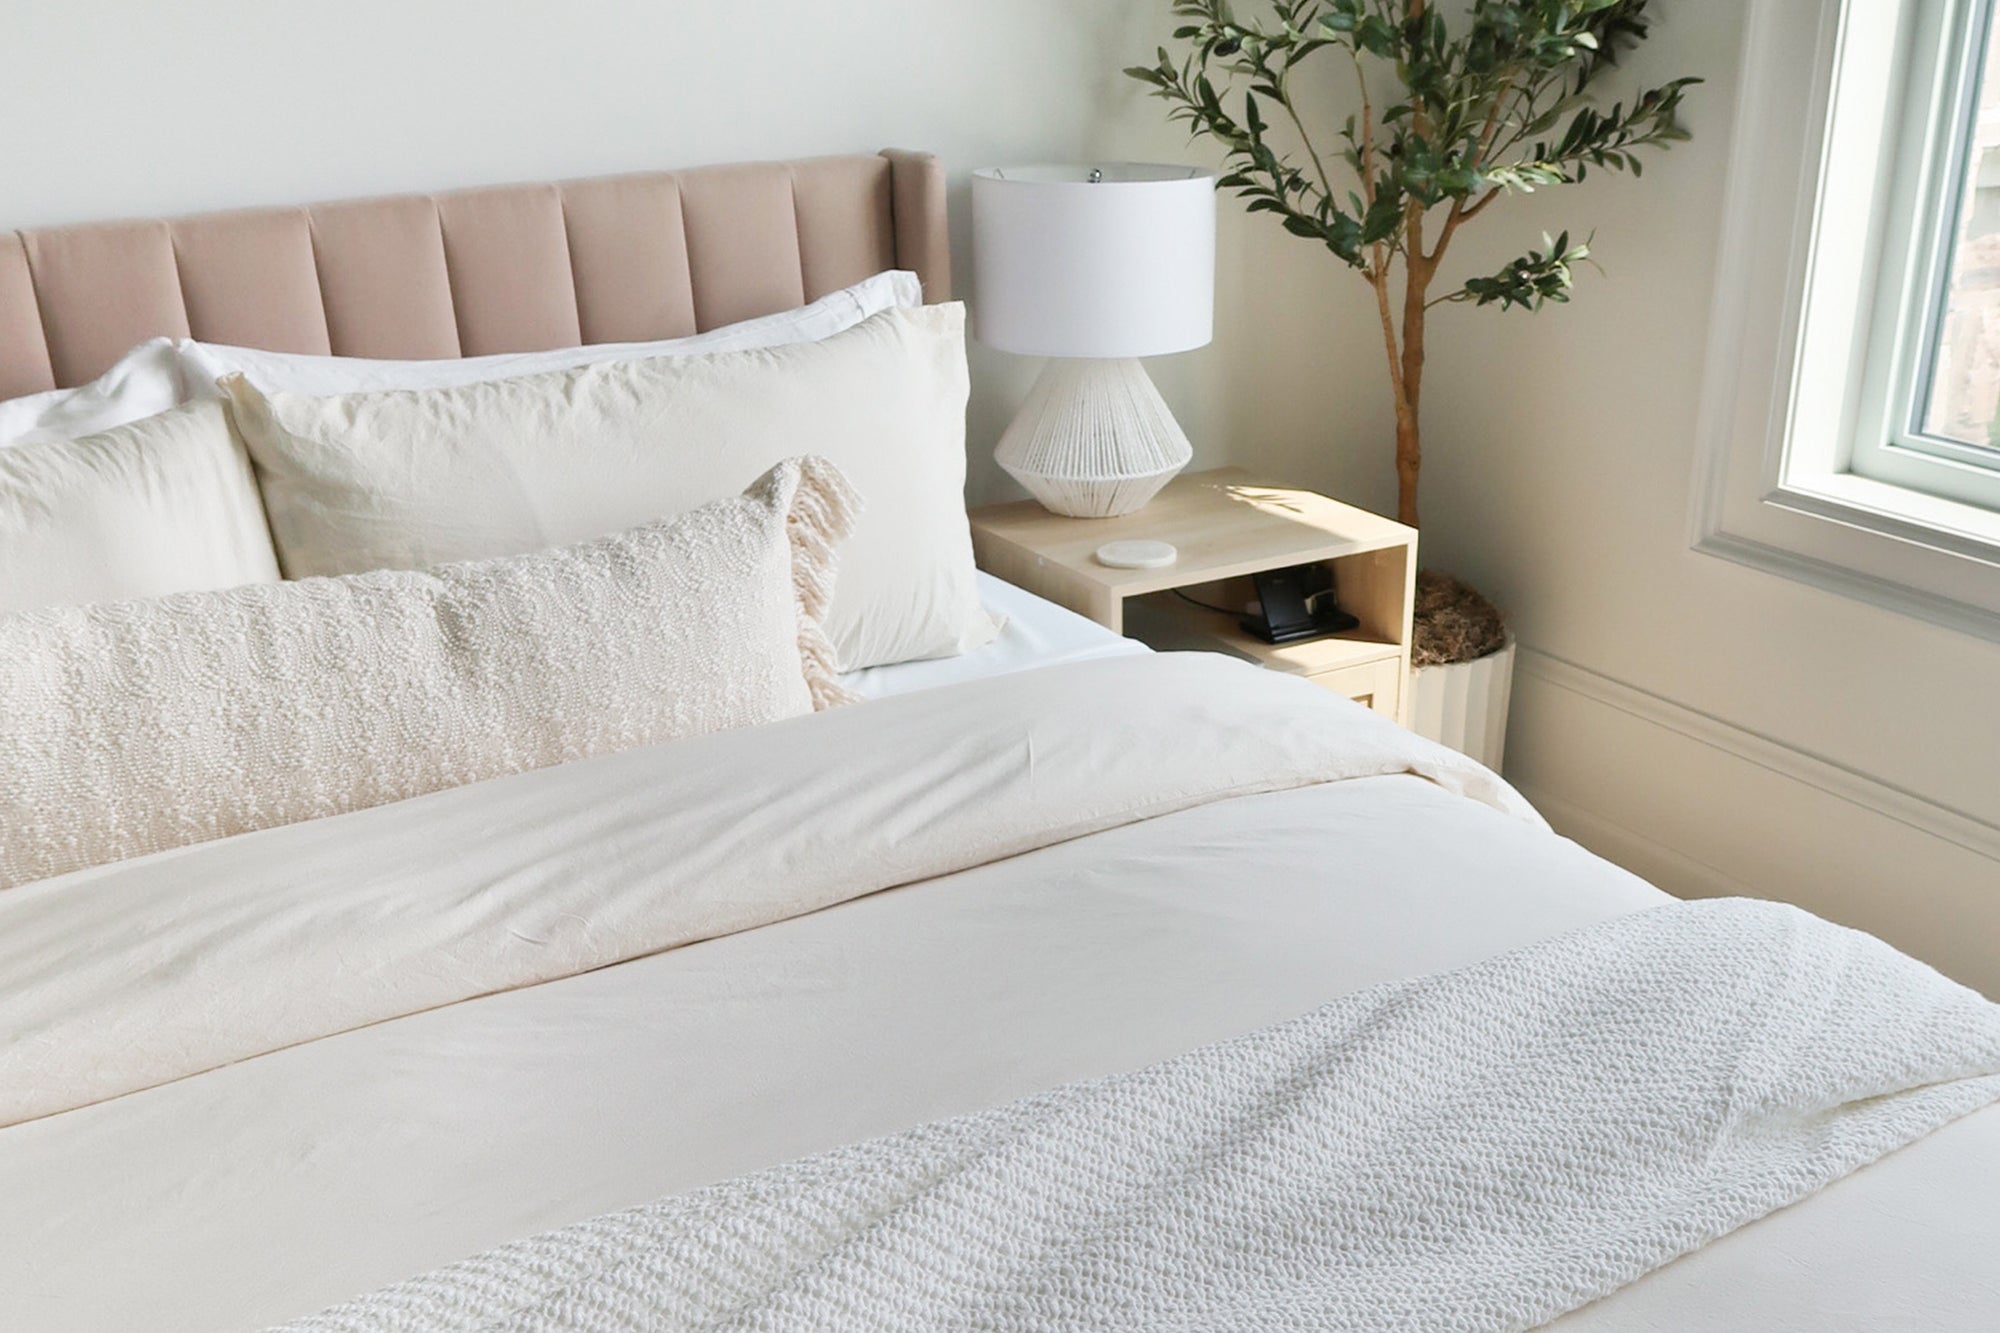 The Definitive Steps You Need to Get Blood Out Of Sheets